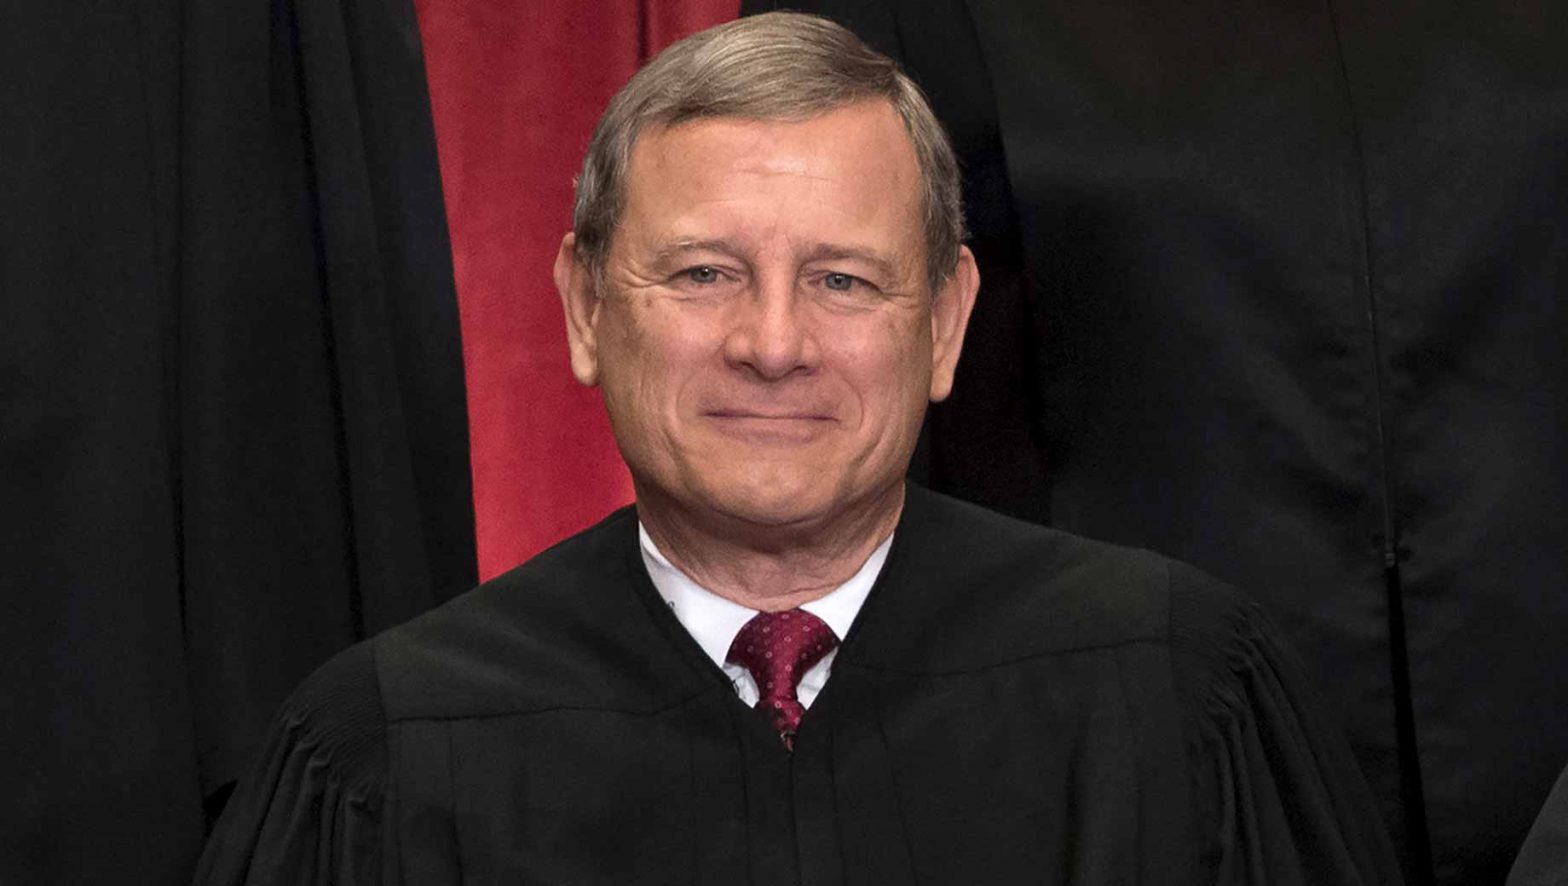 Chief Justice Roberts is America’s Top Federal Leader, According to Poll